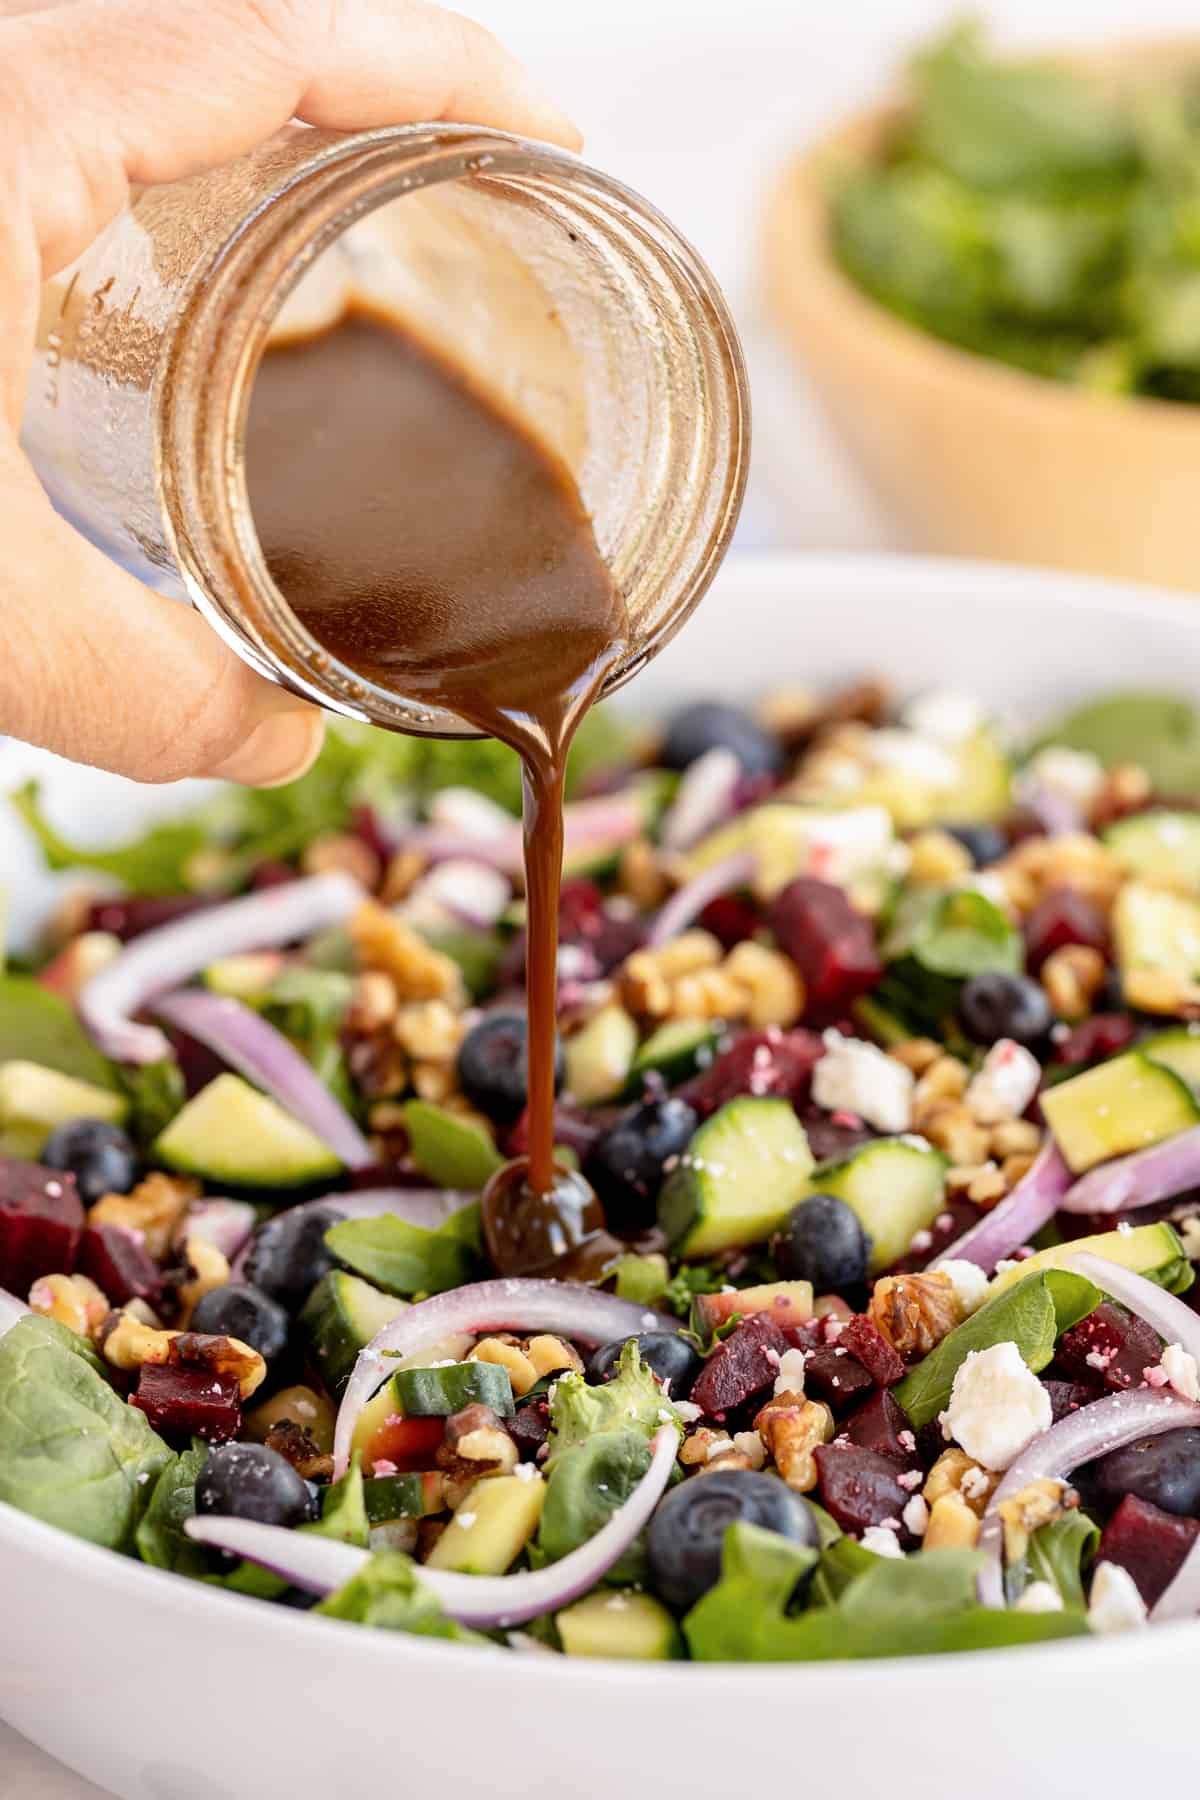 Balsamic dressing pouring on to a salad in a white bowl.